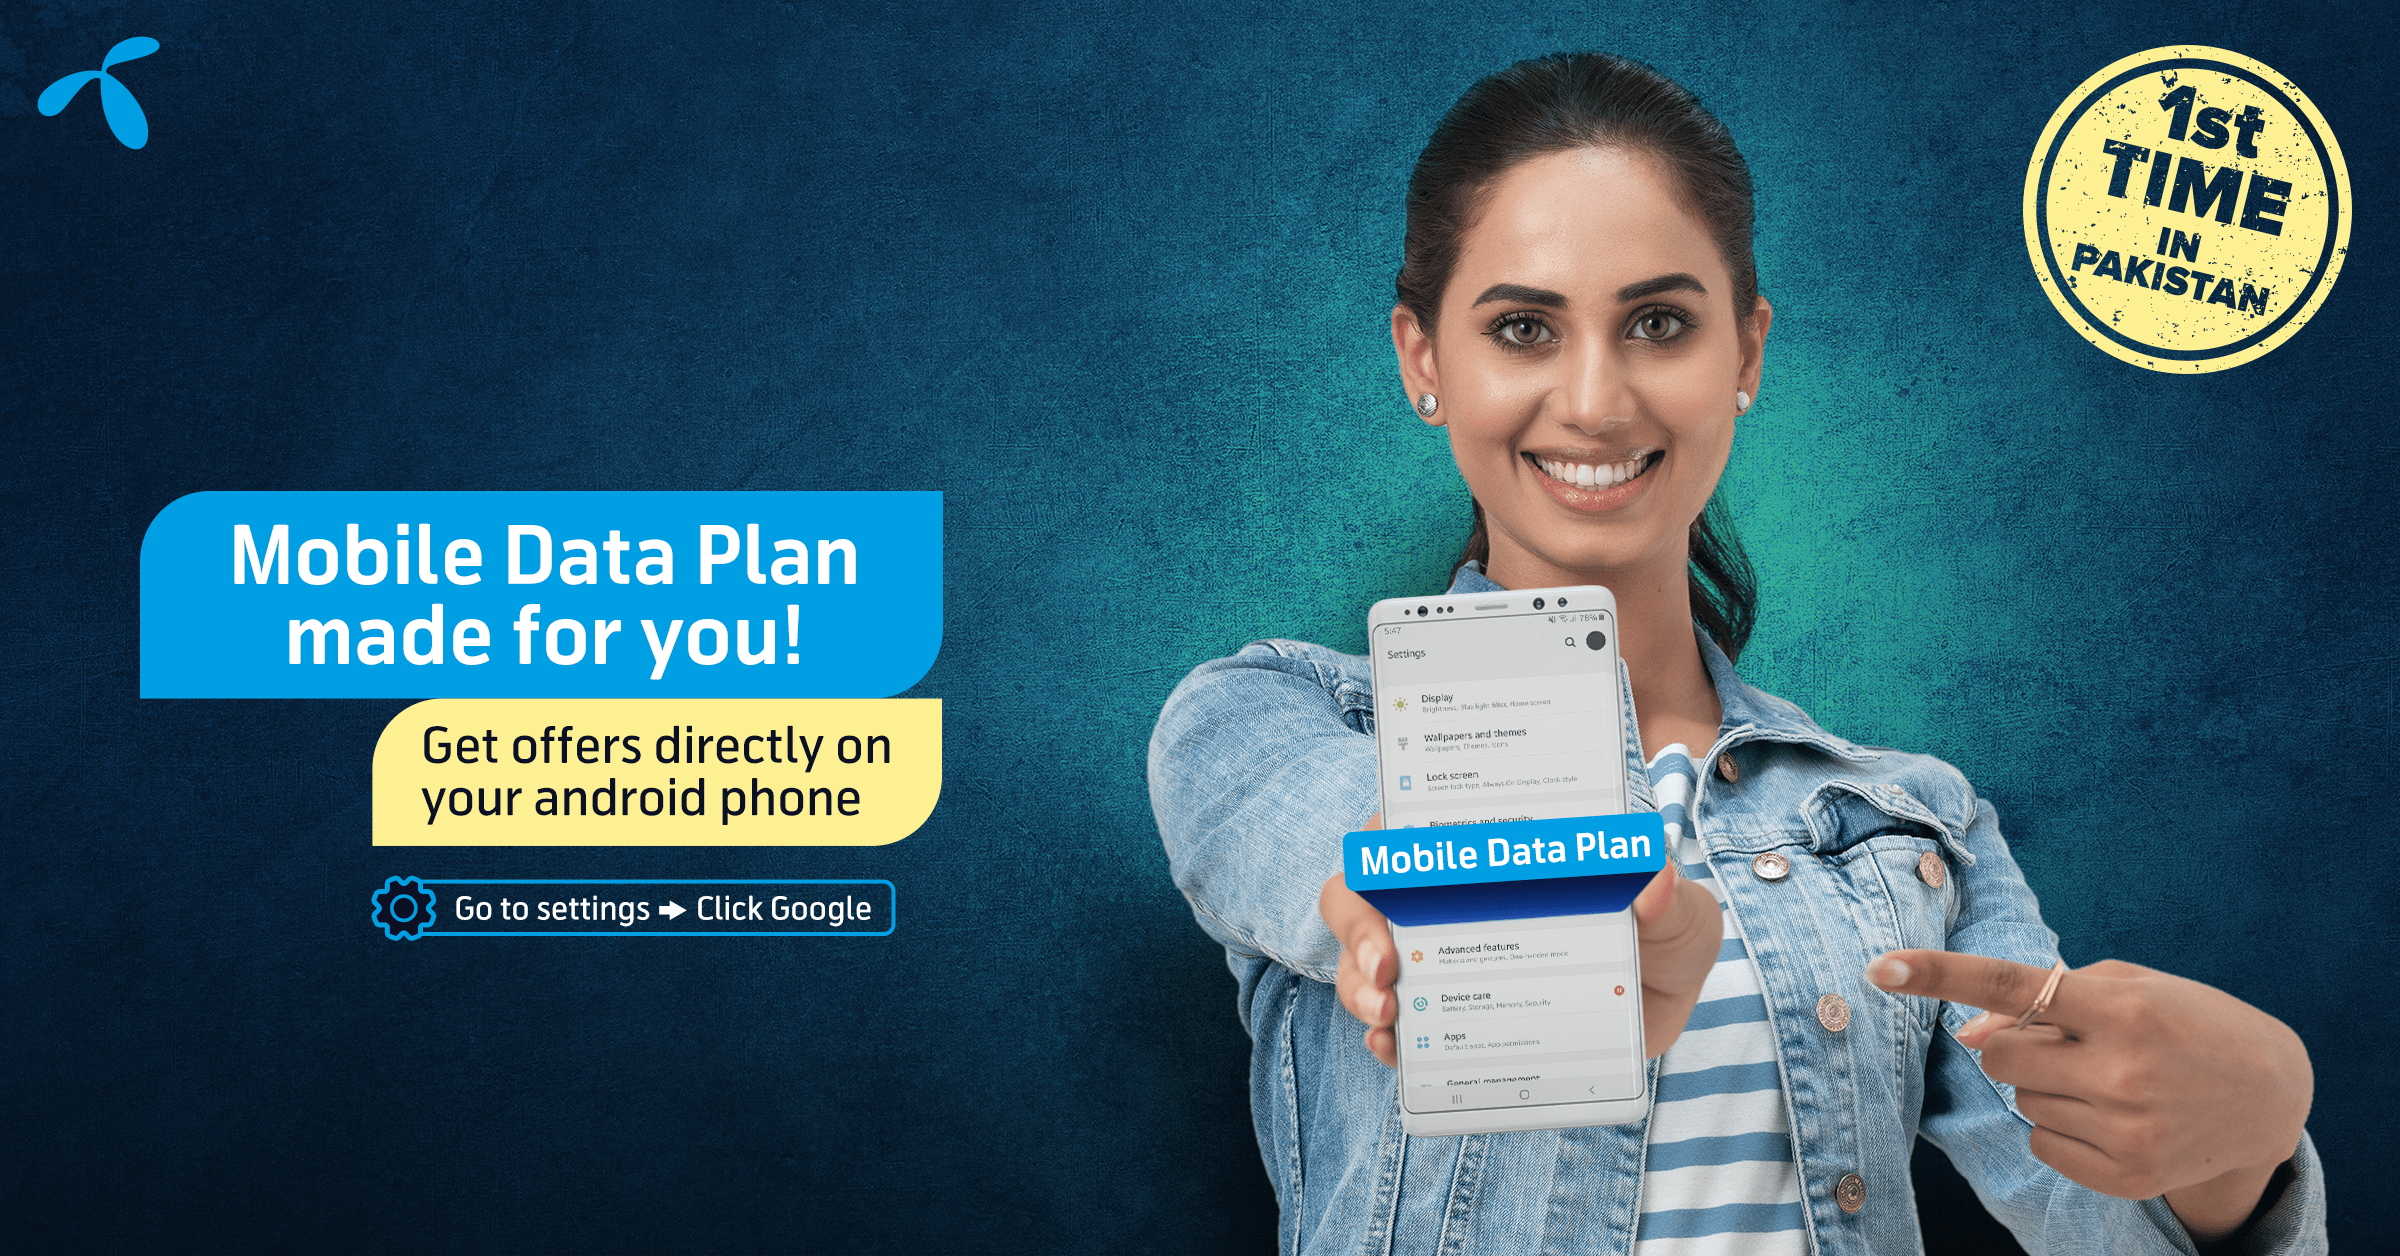 Telenor Pakistan becomes the first Telco to launch Mobile Data Plan for Android users in Pakistan